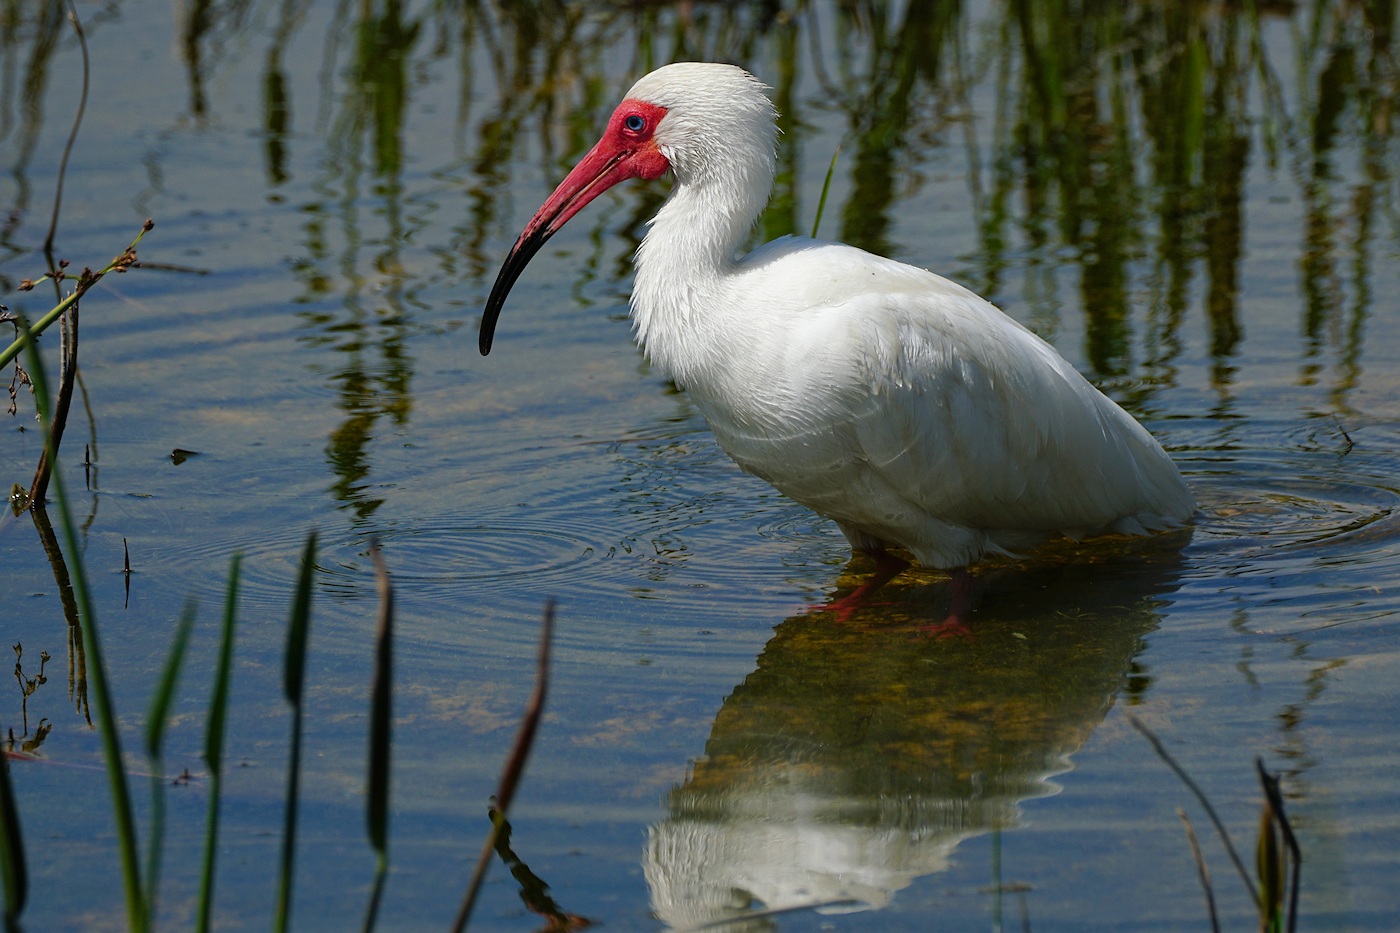 Ibis with strong red mating colors